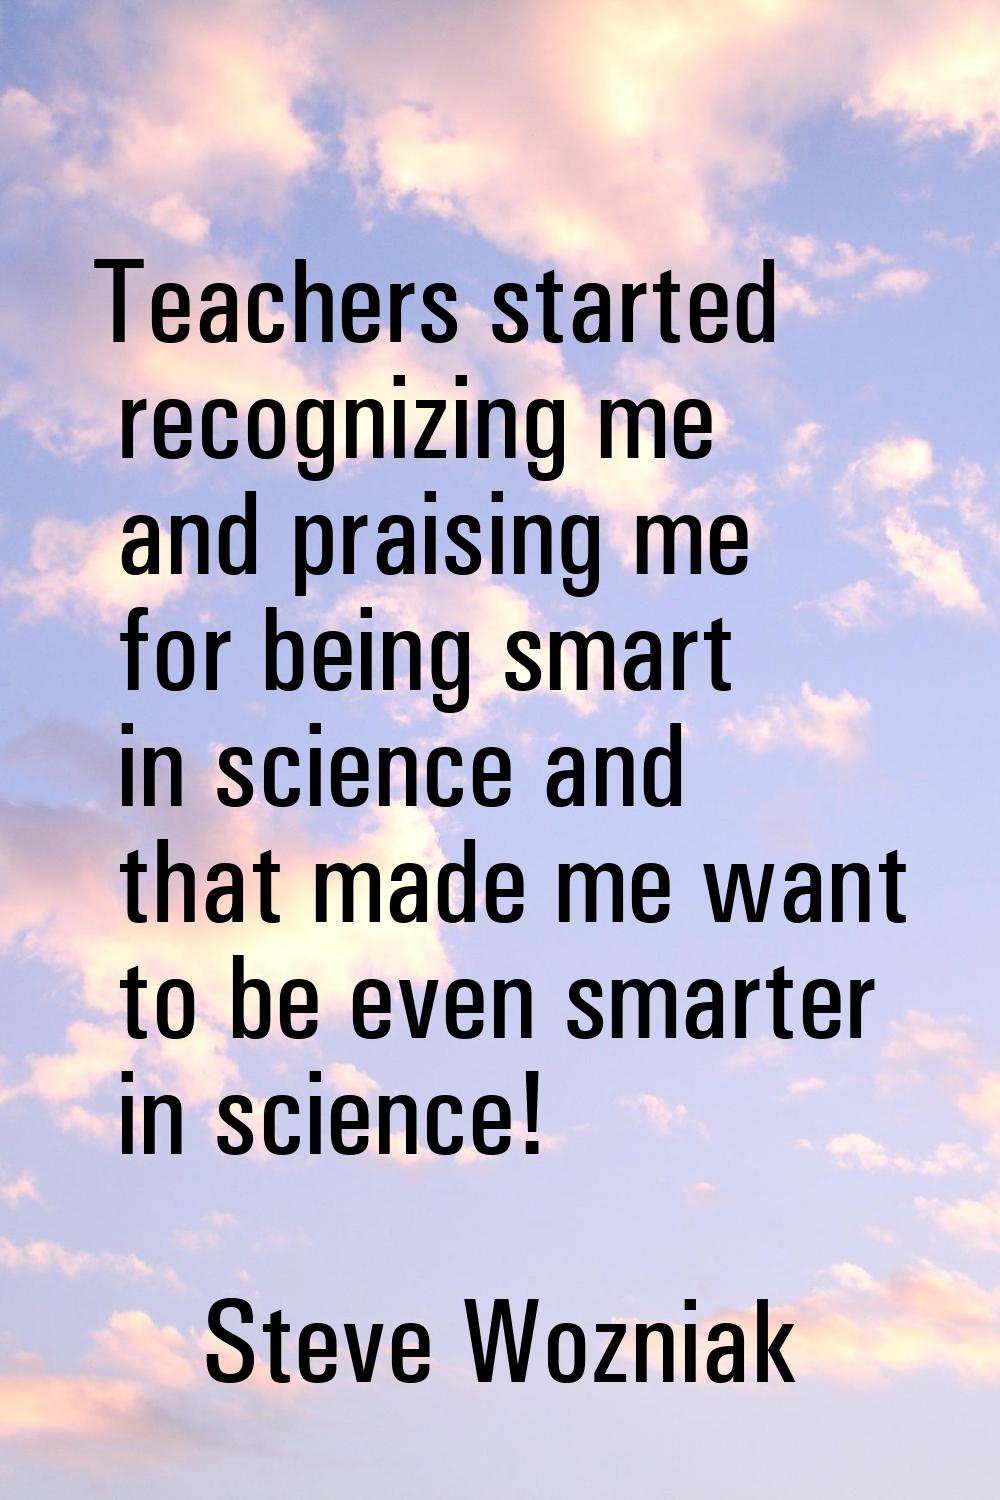 Teachers started recognizing me and praising me for being smart in science and that made me want to